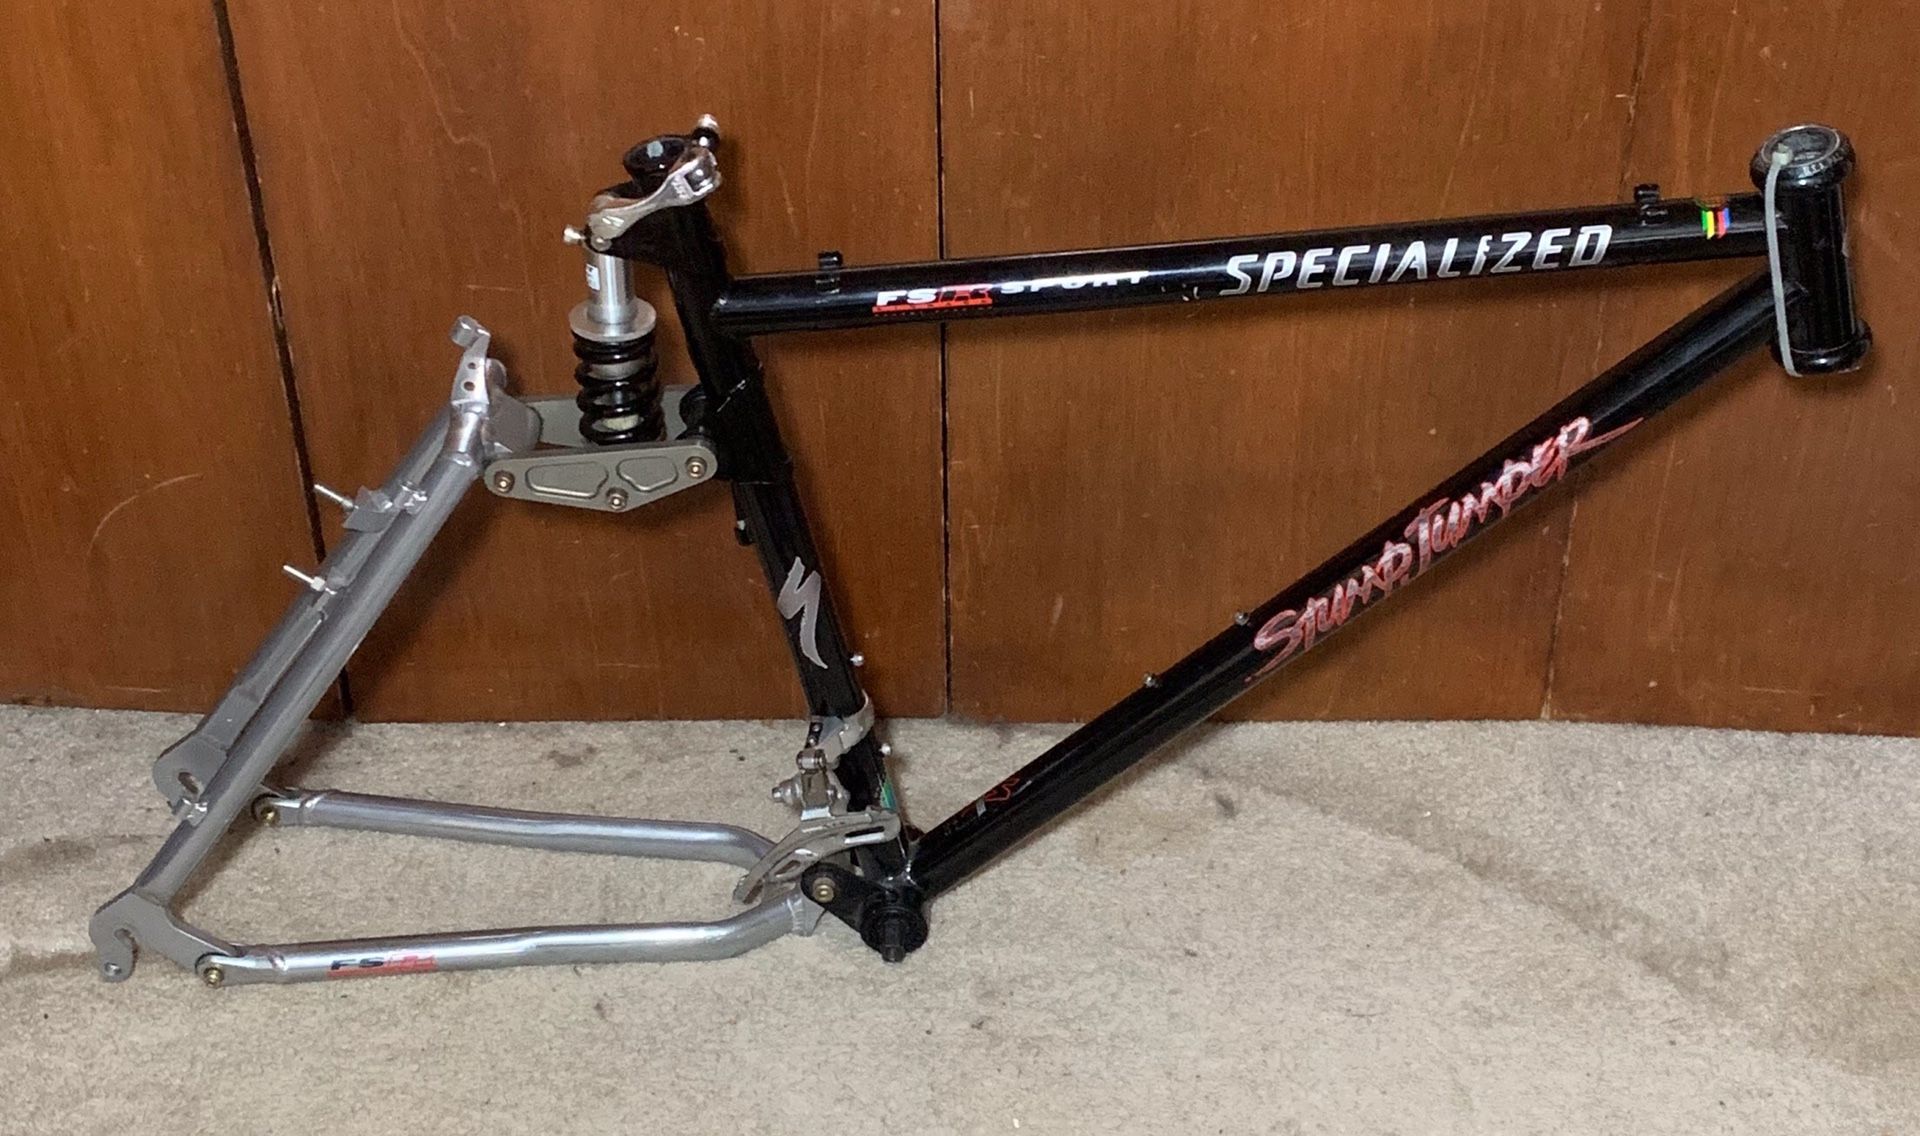 Specialized frame/GT road bikes street legal